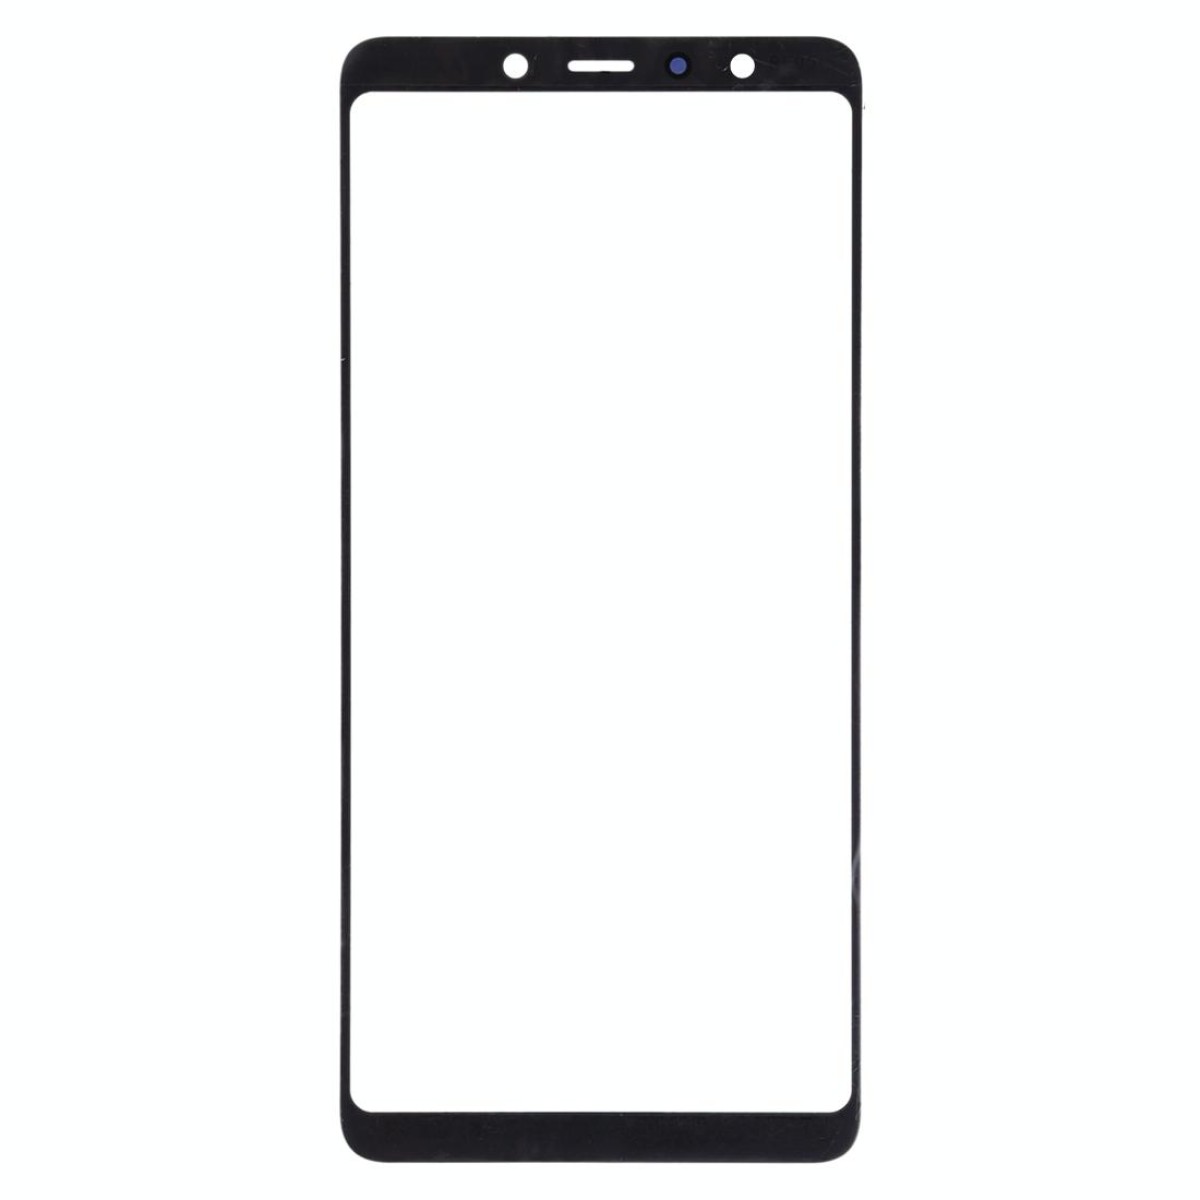 For Samsung Galaxy A7 2018 / A750 Front Screen Outer Glass Lens with OCA Optically Clear Adhesive